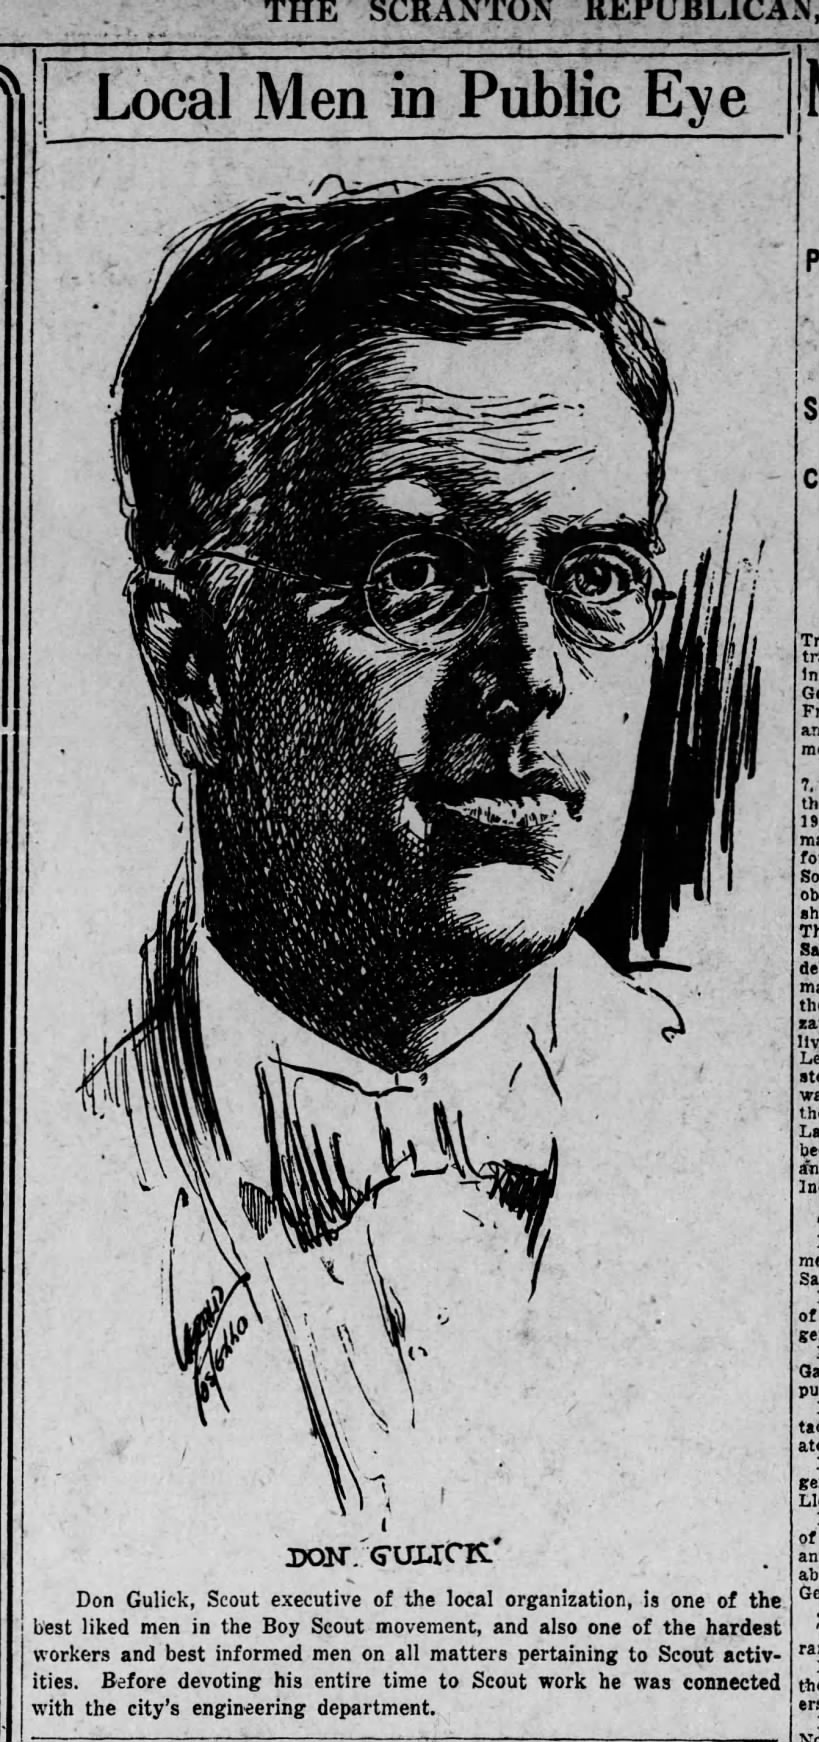 Jerry Costello Portrait of Don Gulick Scr Rep Jan 7 1919 pg 4